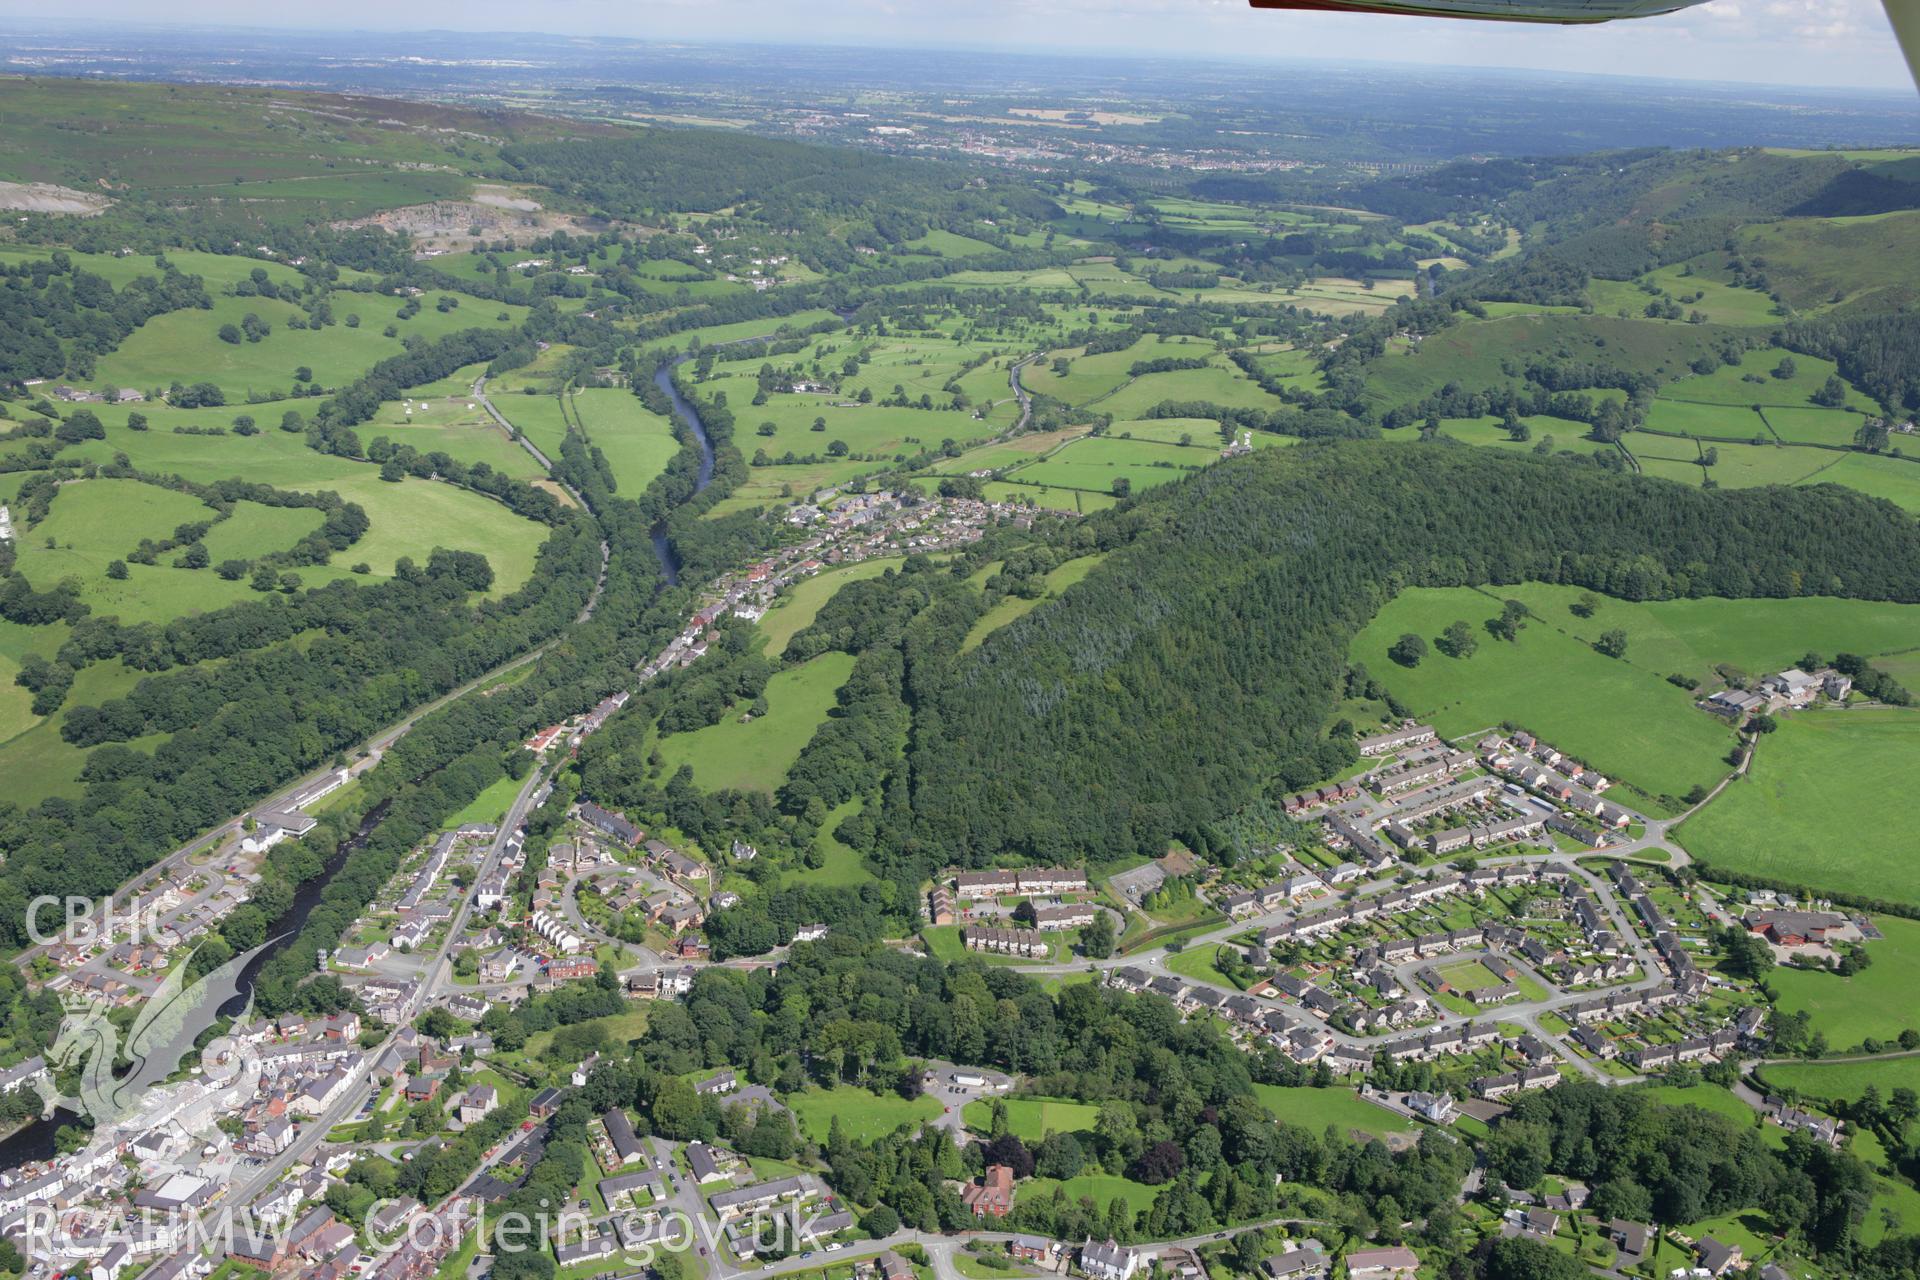 RCAHMW colour oblique aerial photograph of Llangollen. Taken on 24 July 2007 by Toby Driver